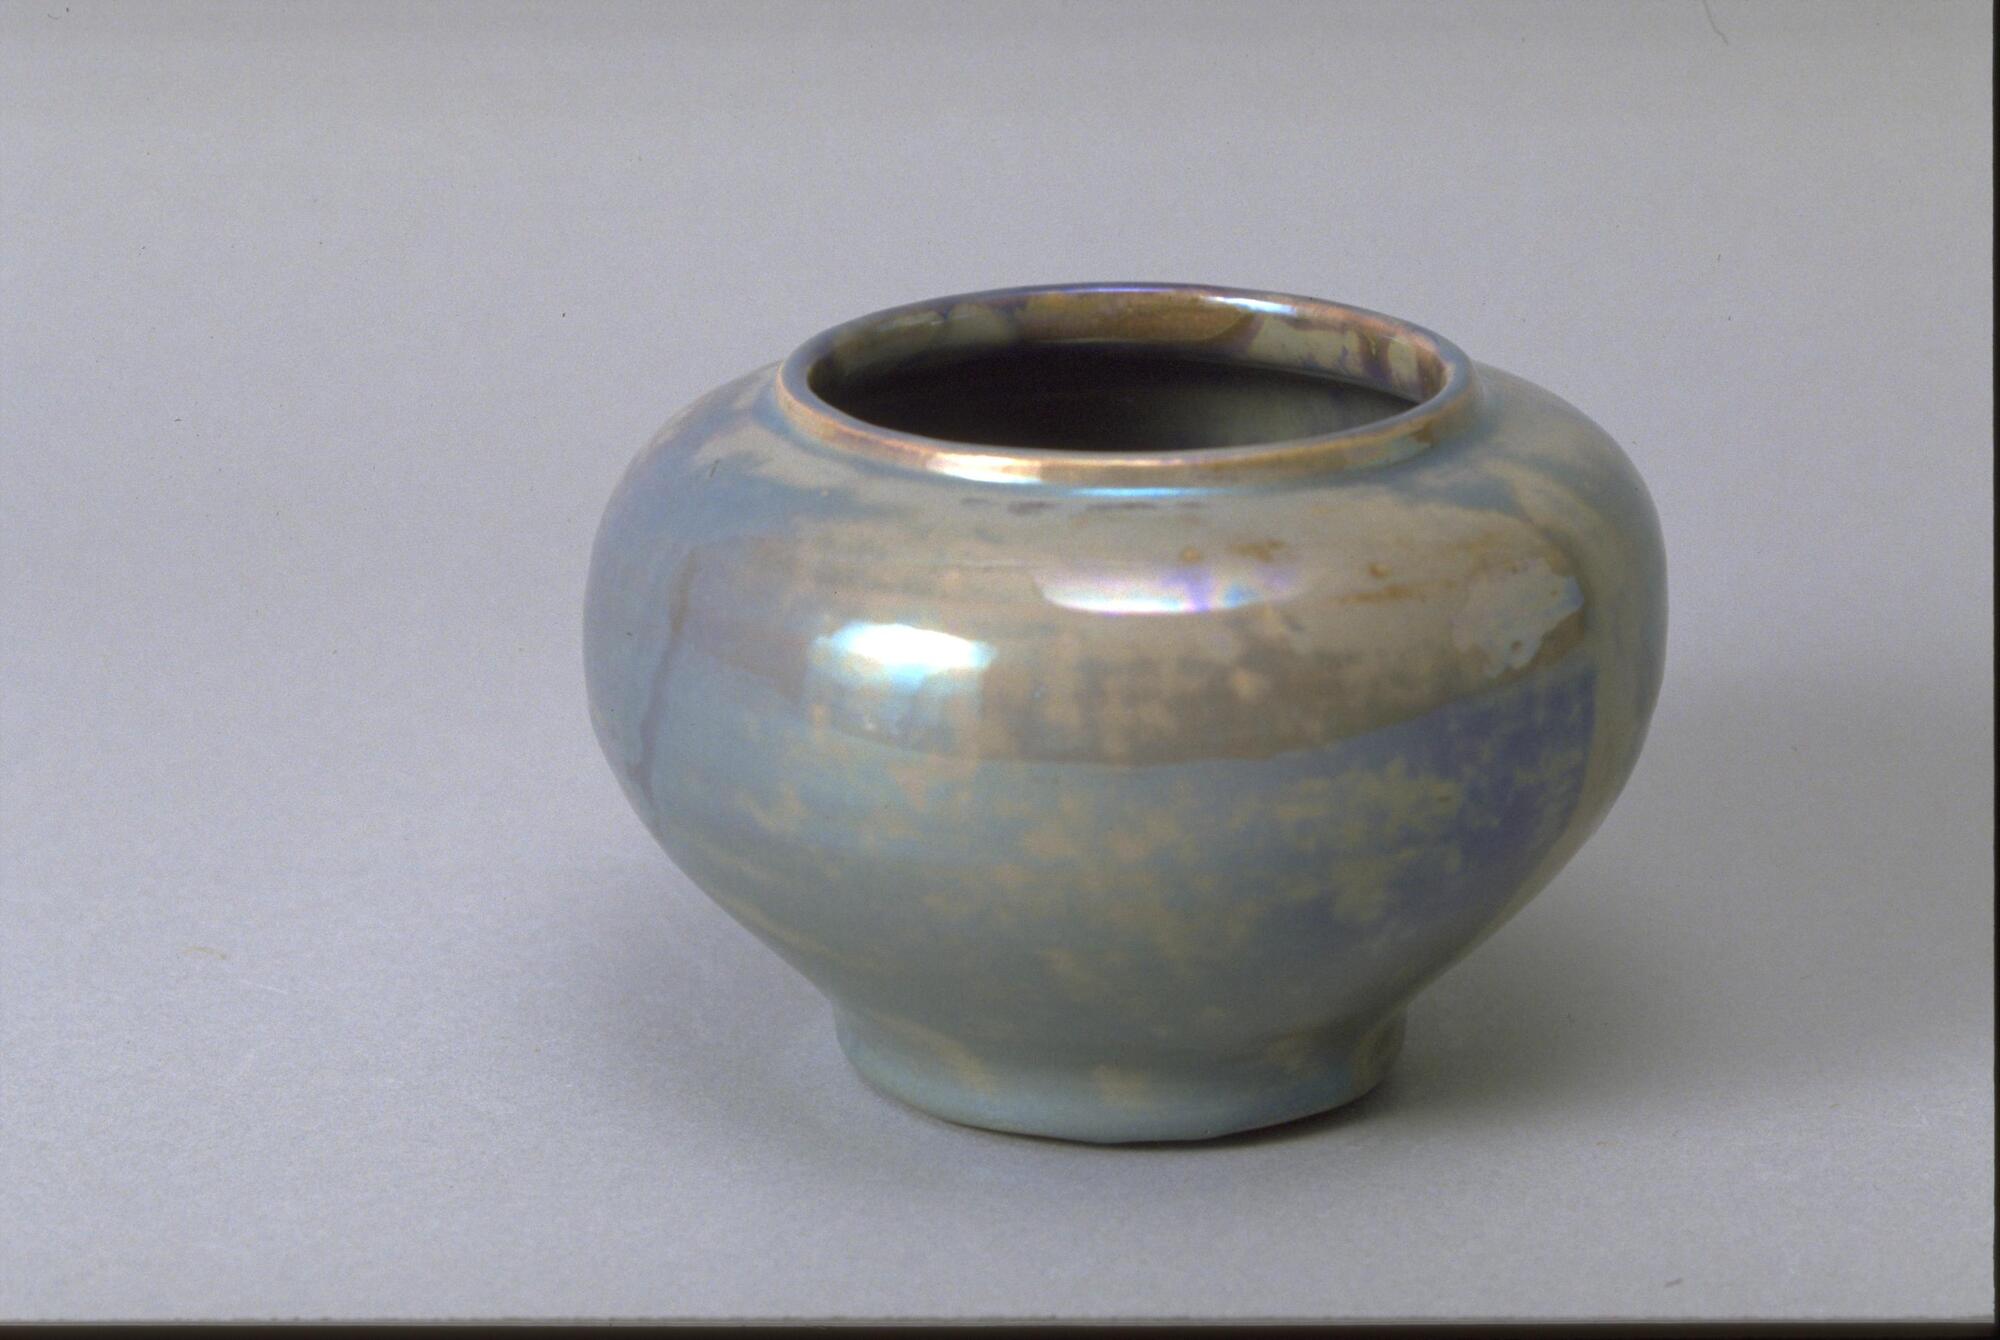 Footed vessel with round body, small lip and wide mouth covered in iridescent cracked gray-ish blue glaze